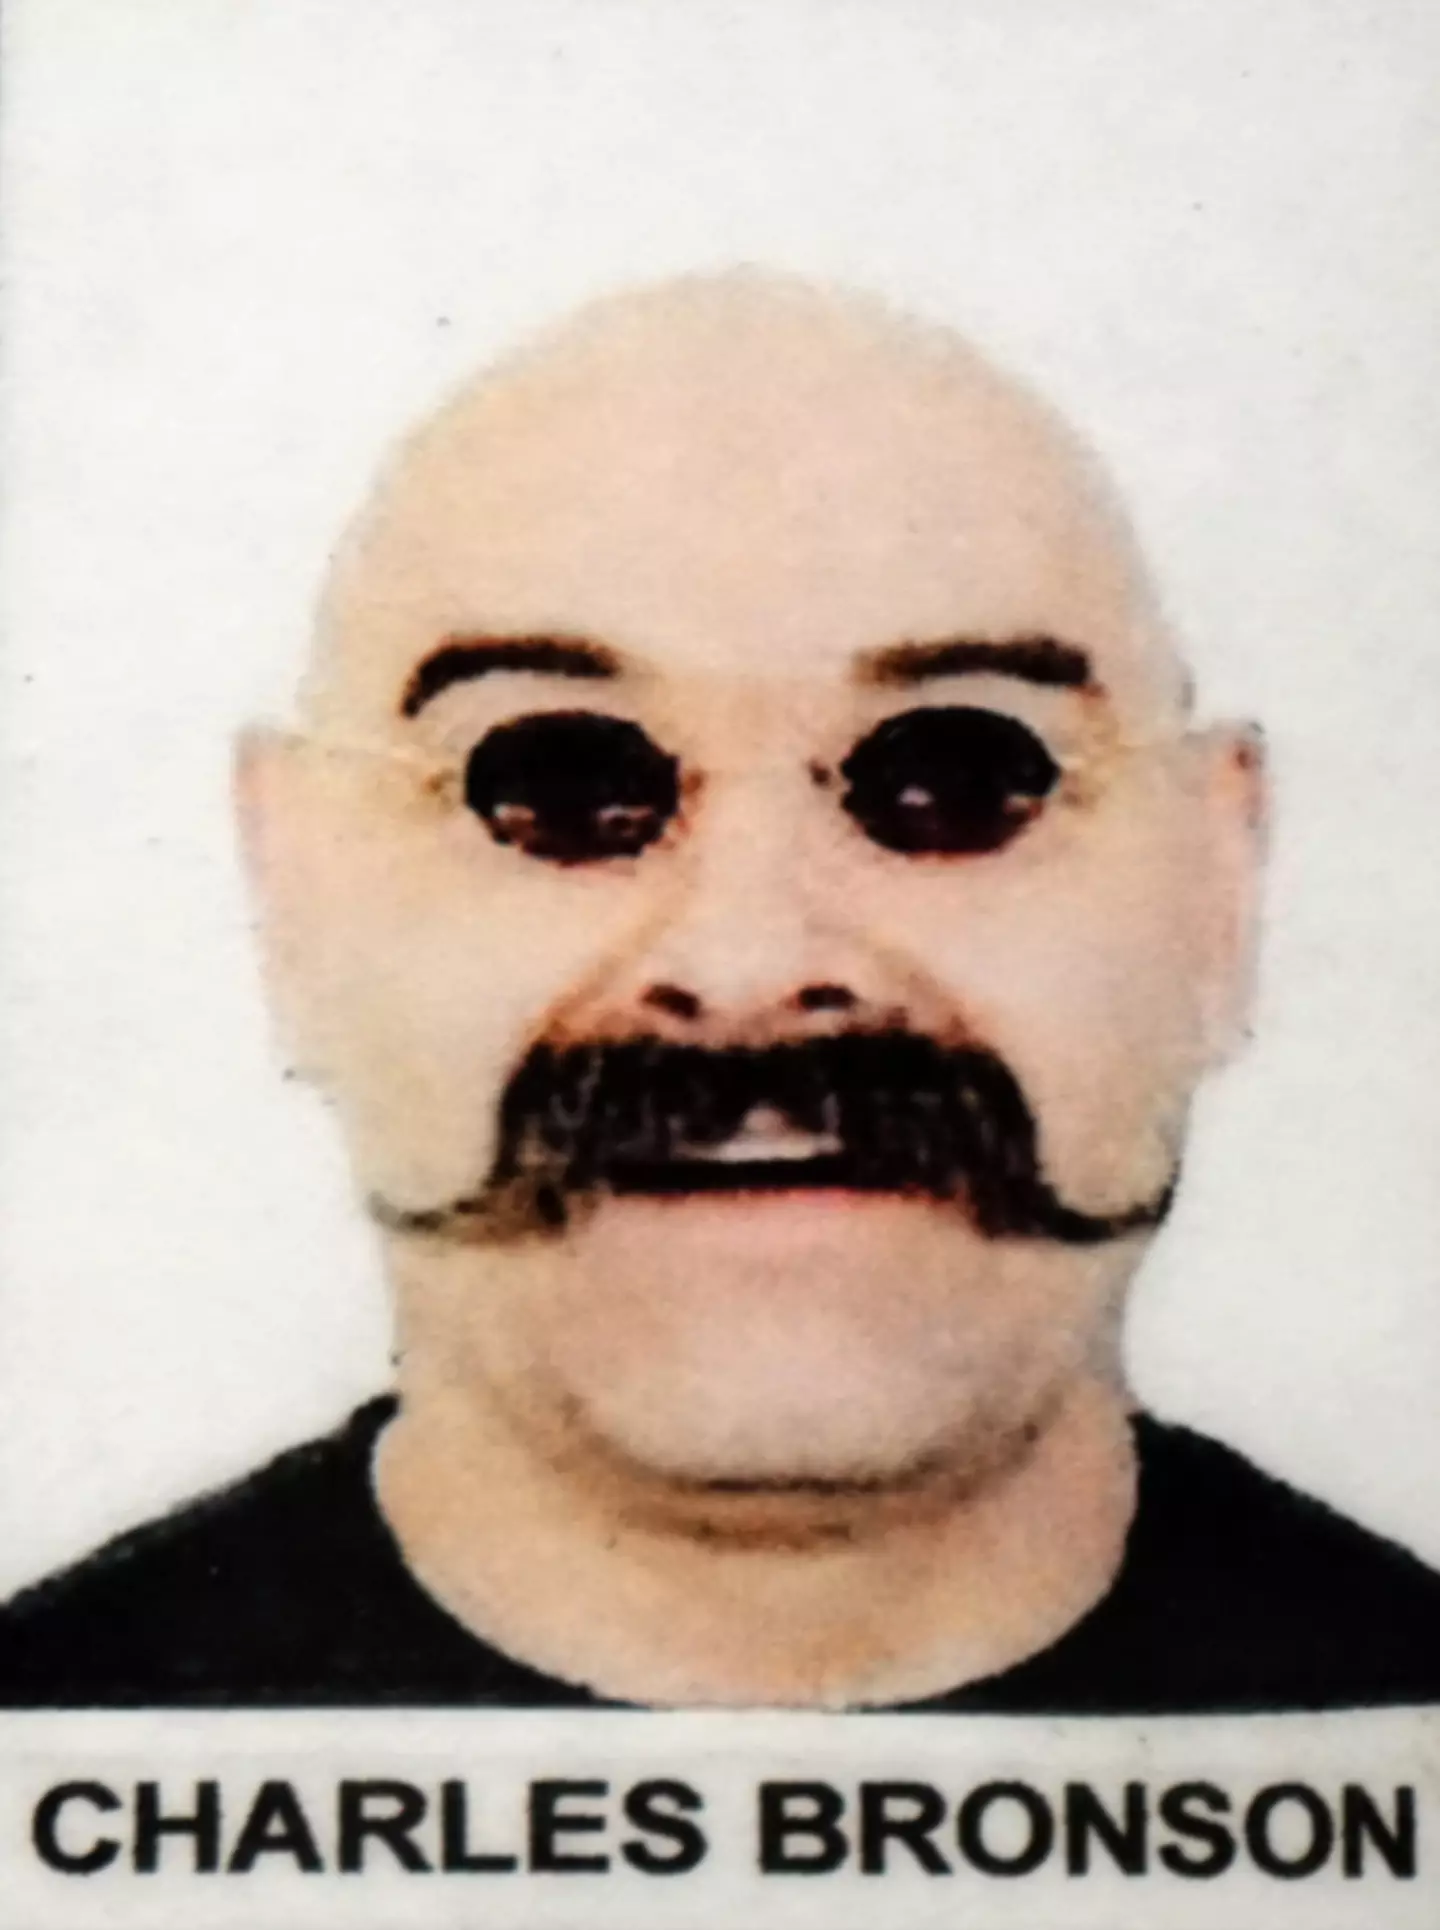 Charles Bronson is set to hear whether his parole request has been successful or not.